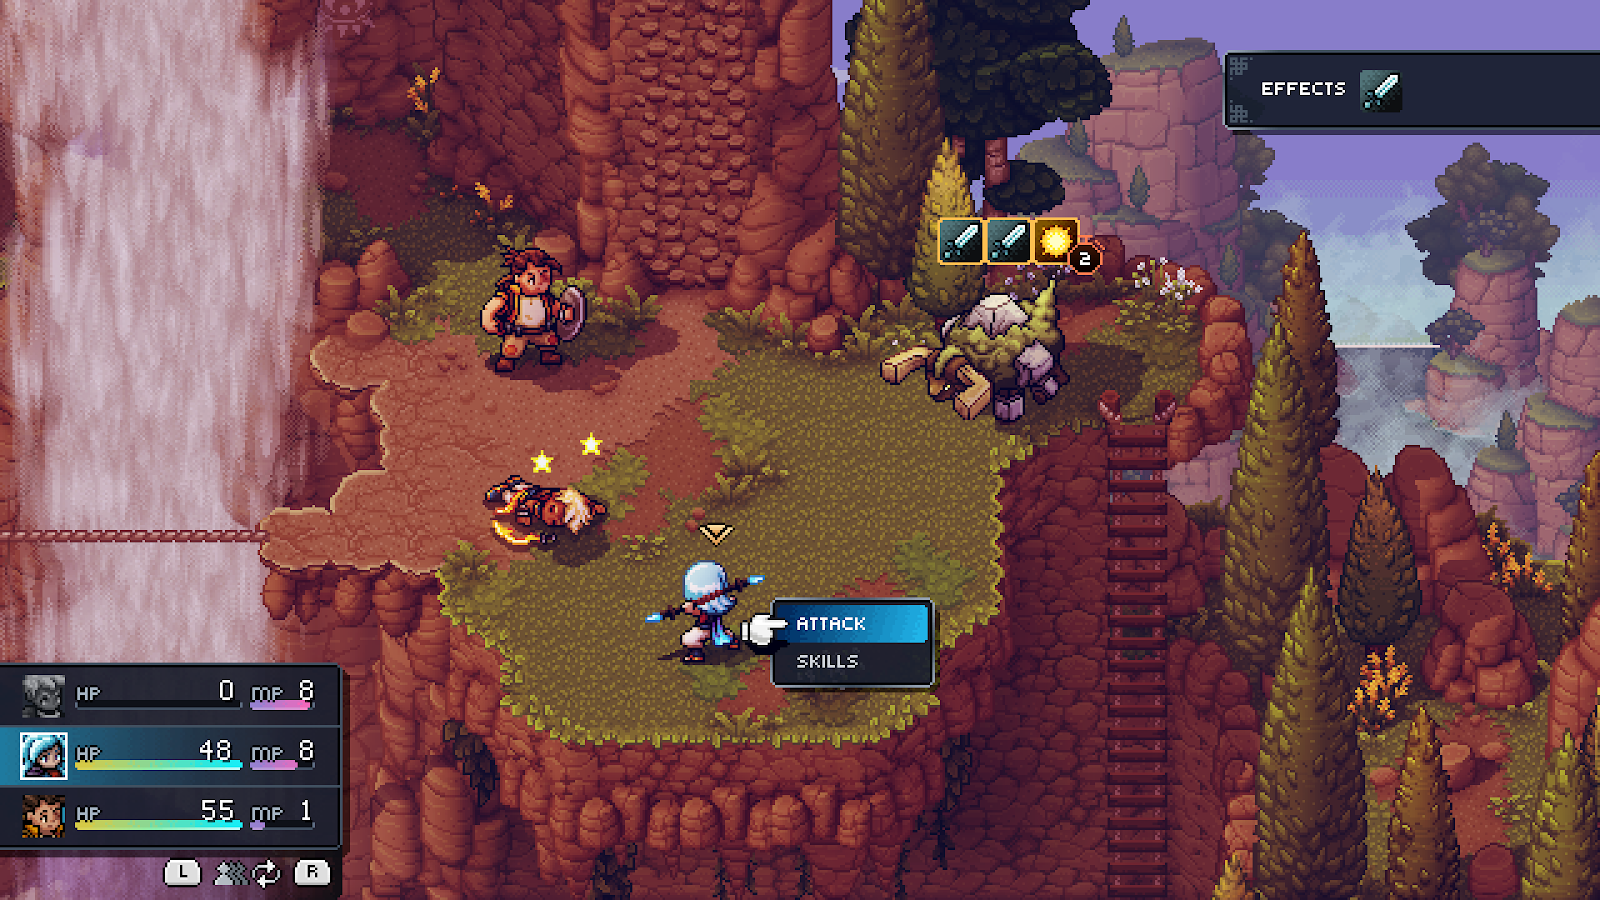 A screenshot of gameplay from Sea of Stars, showcasing the environments and user-interface.